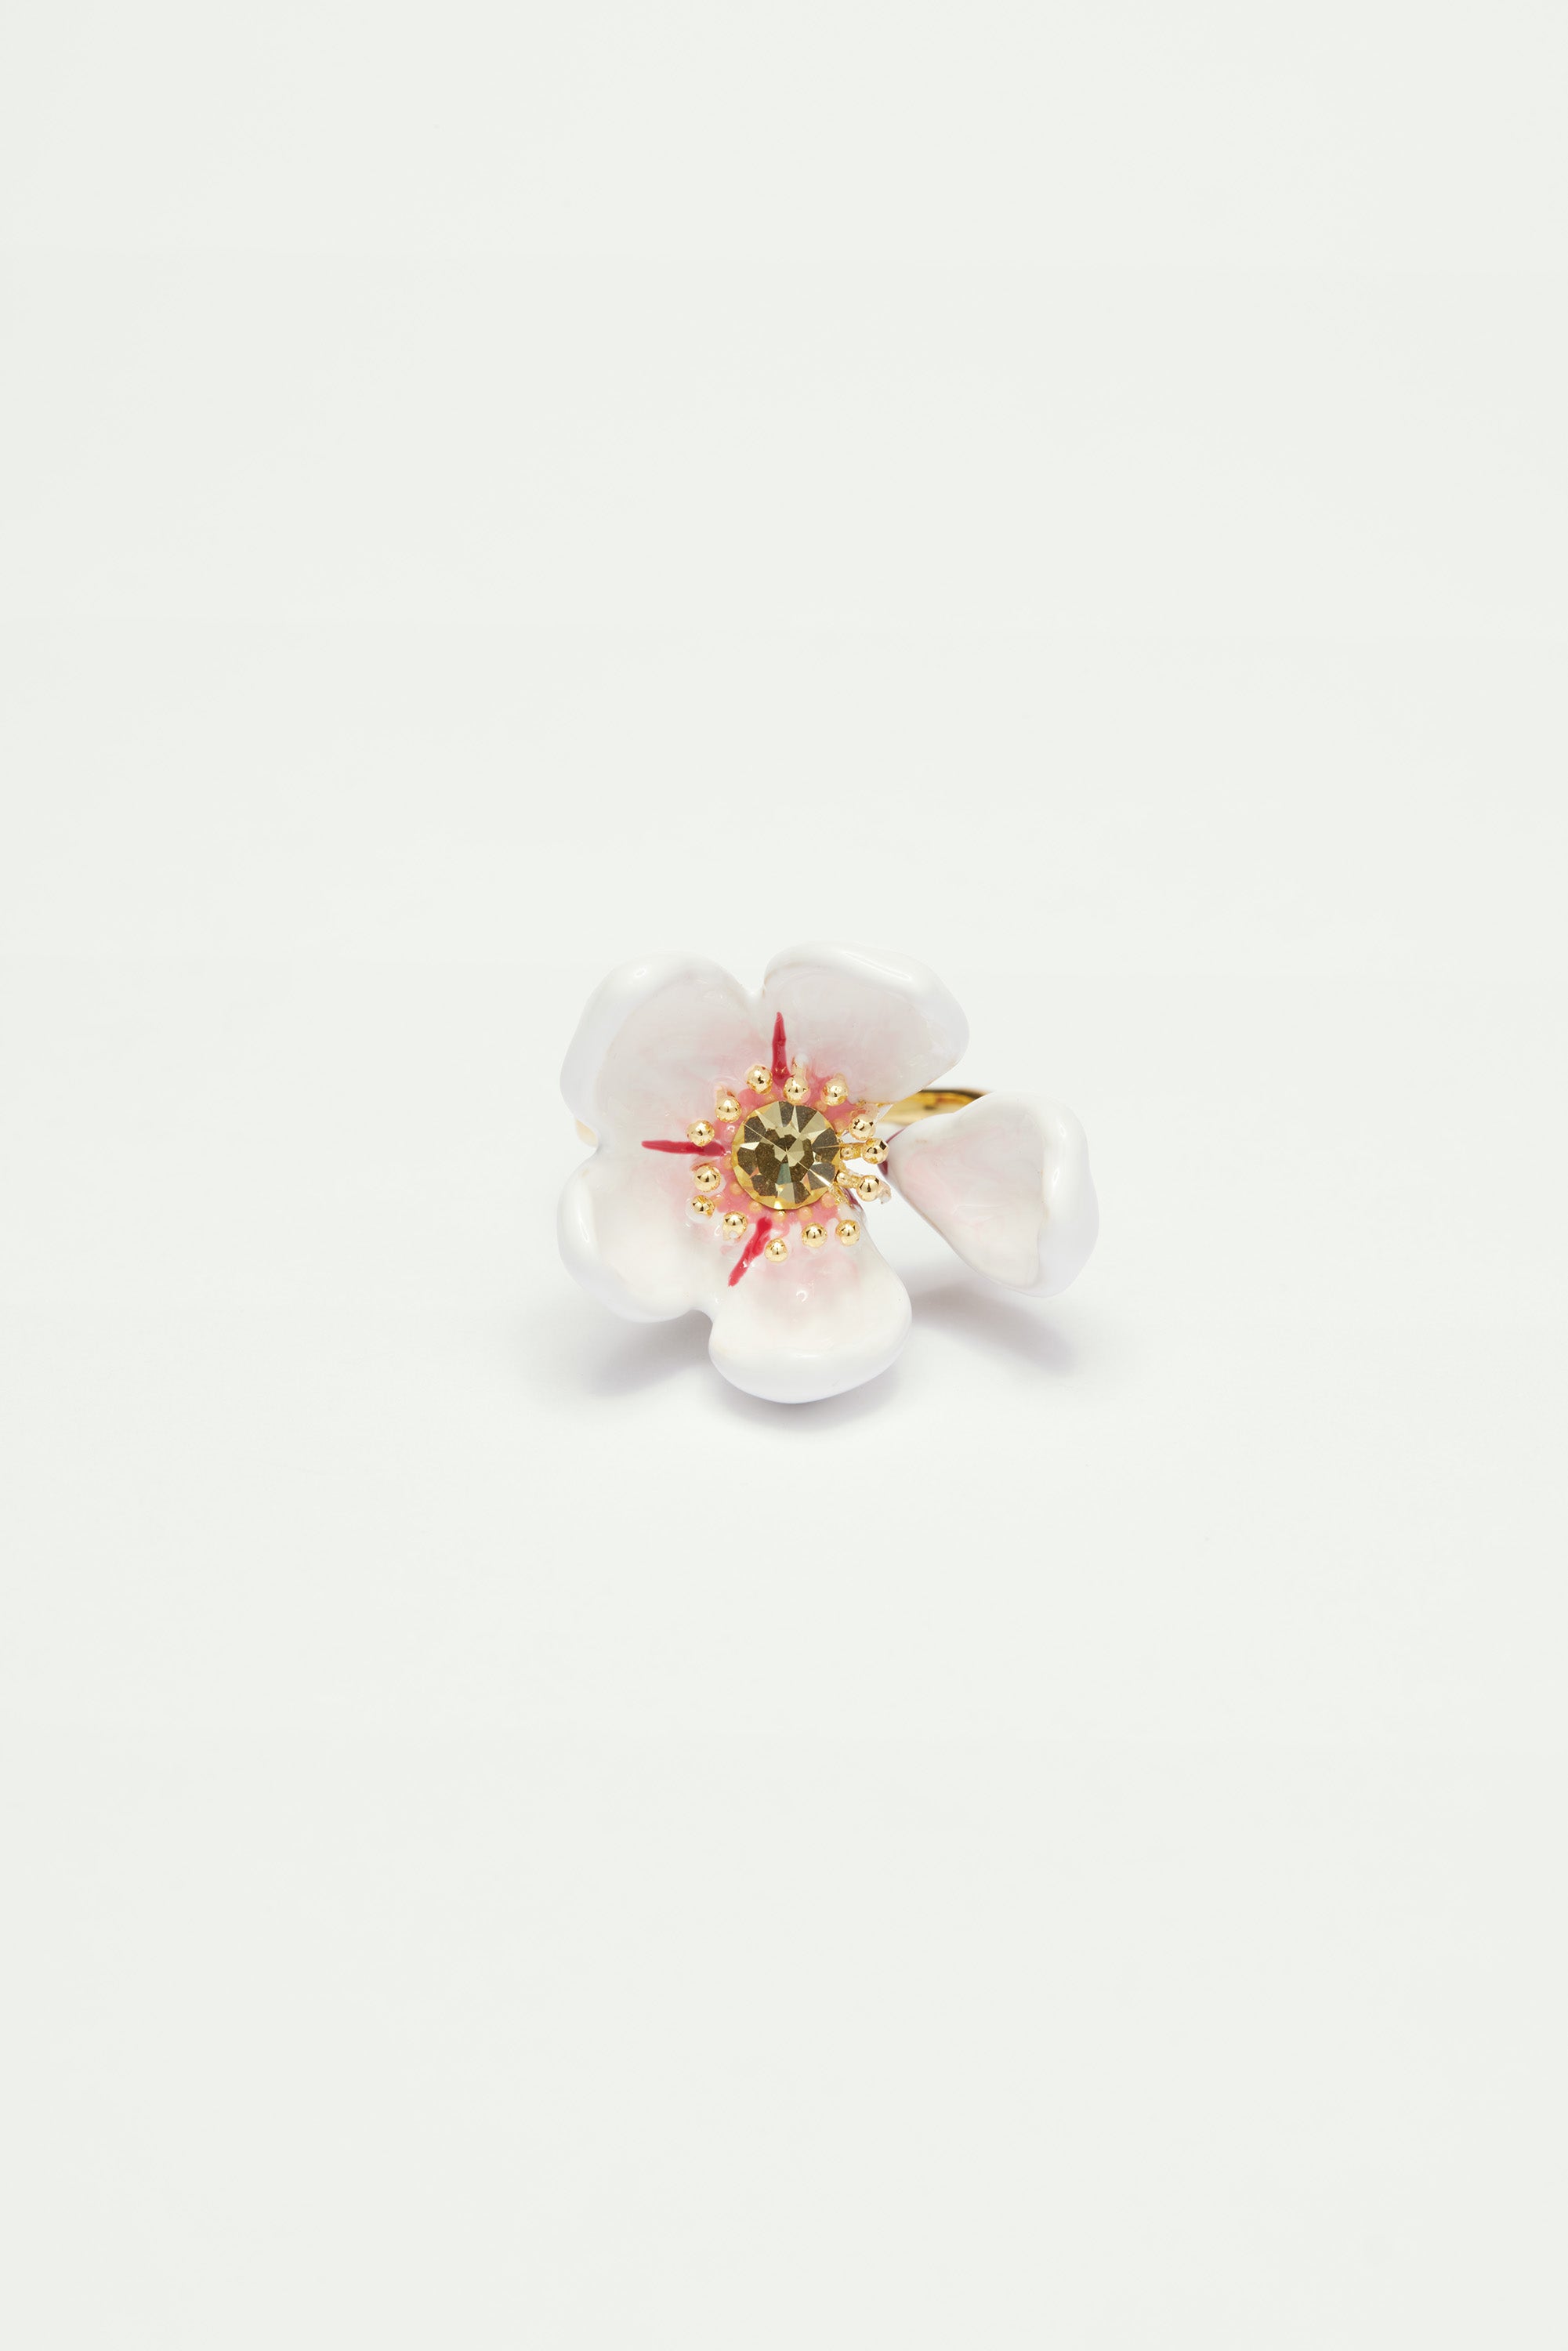 Japanese white cherry blossom and petals adjustable ring